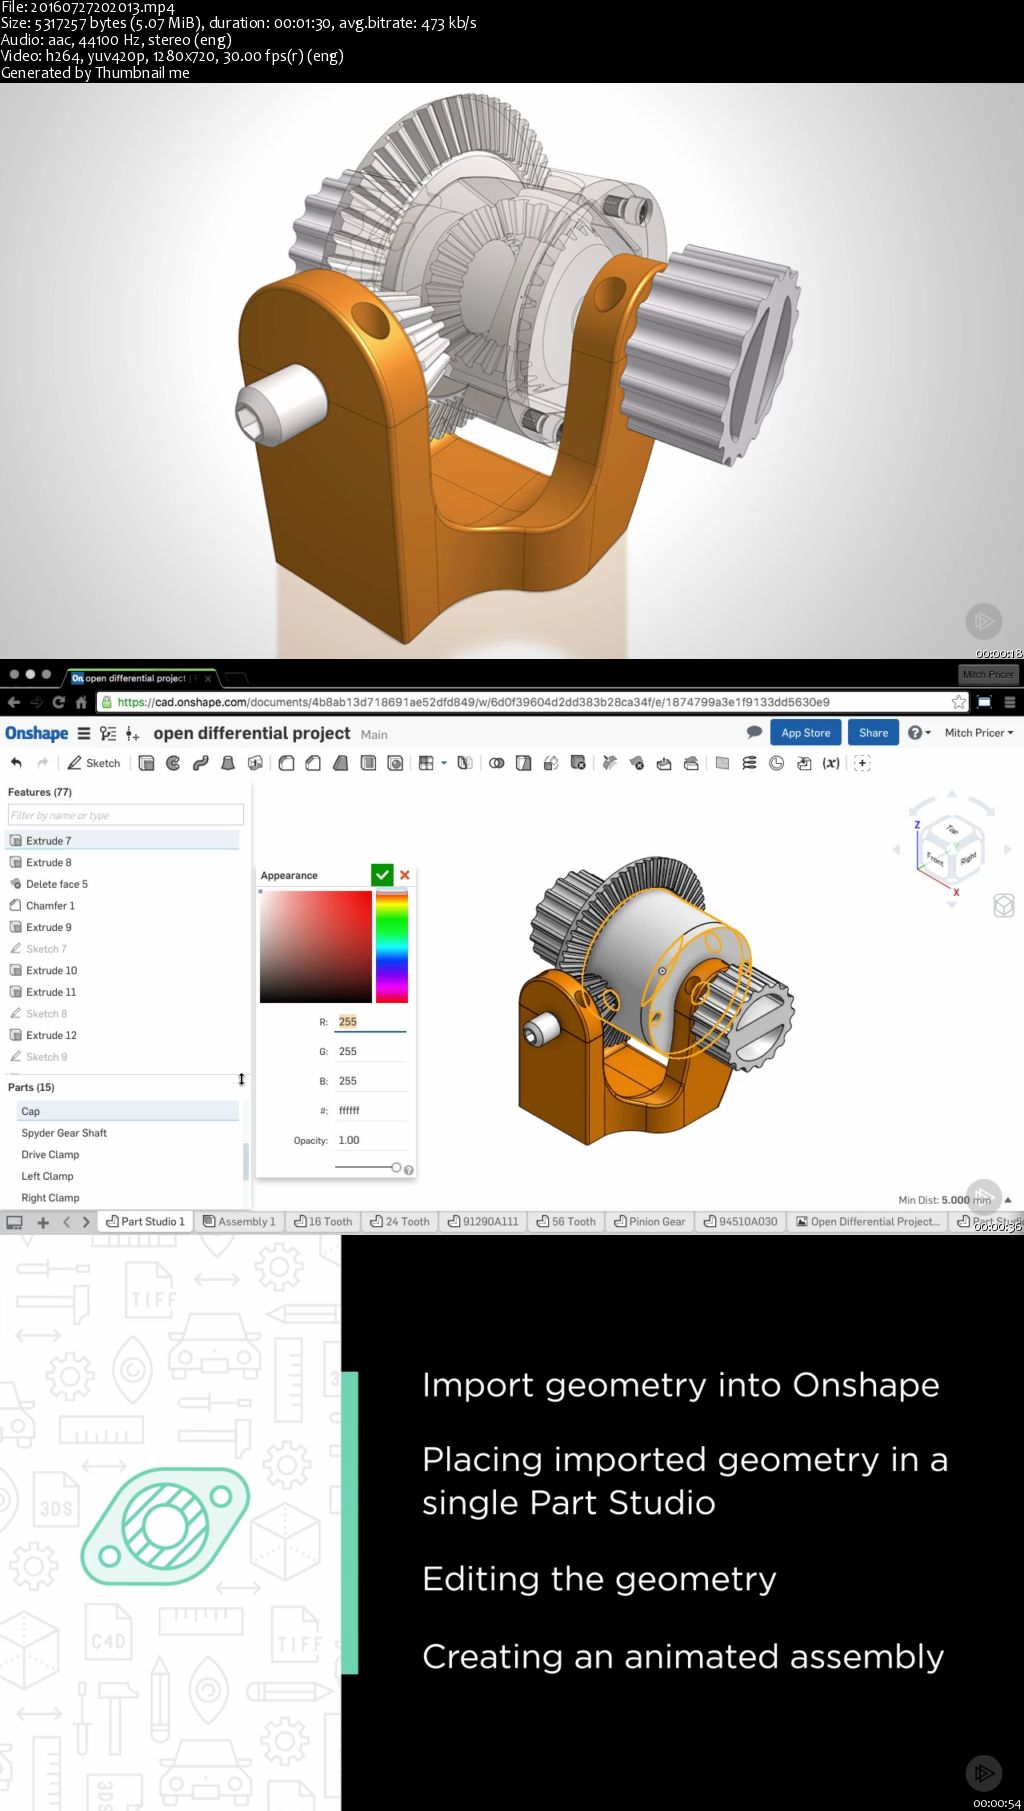 Onshape - Using and Editing Imported Geometry in Your Designs